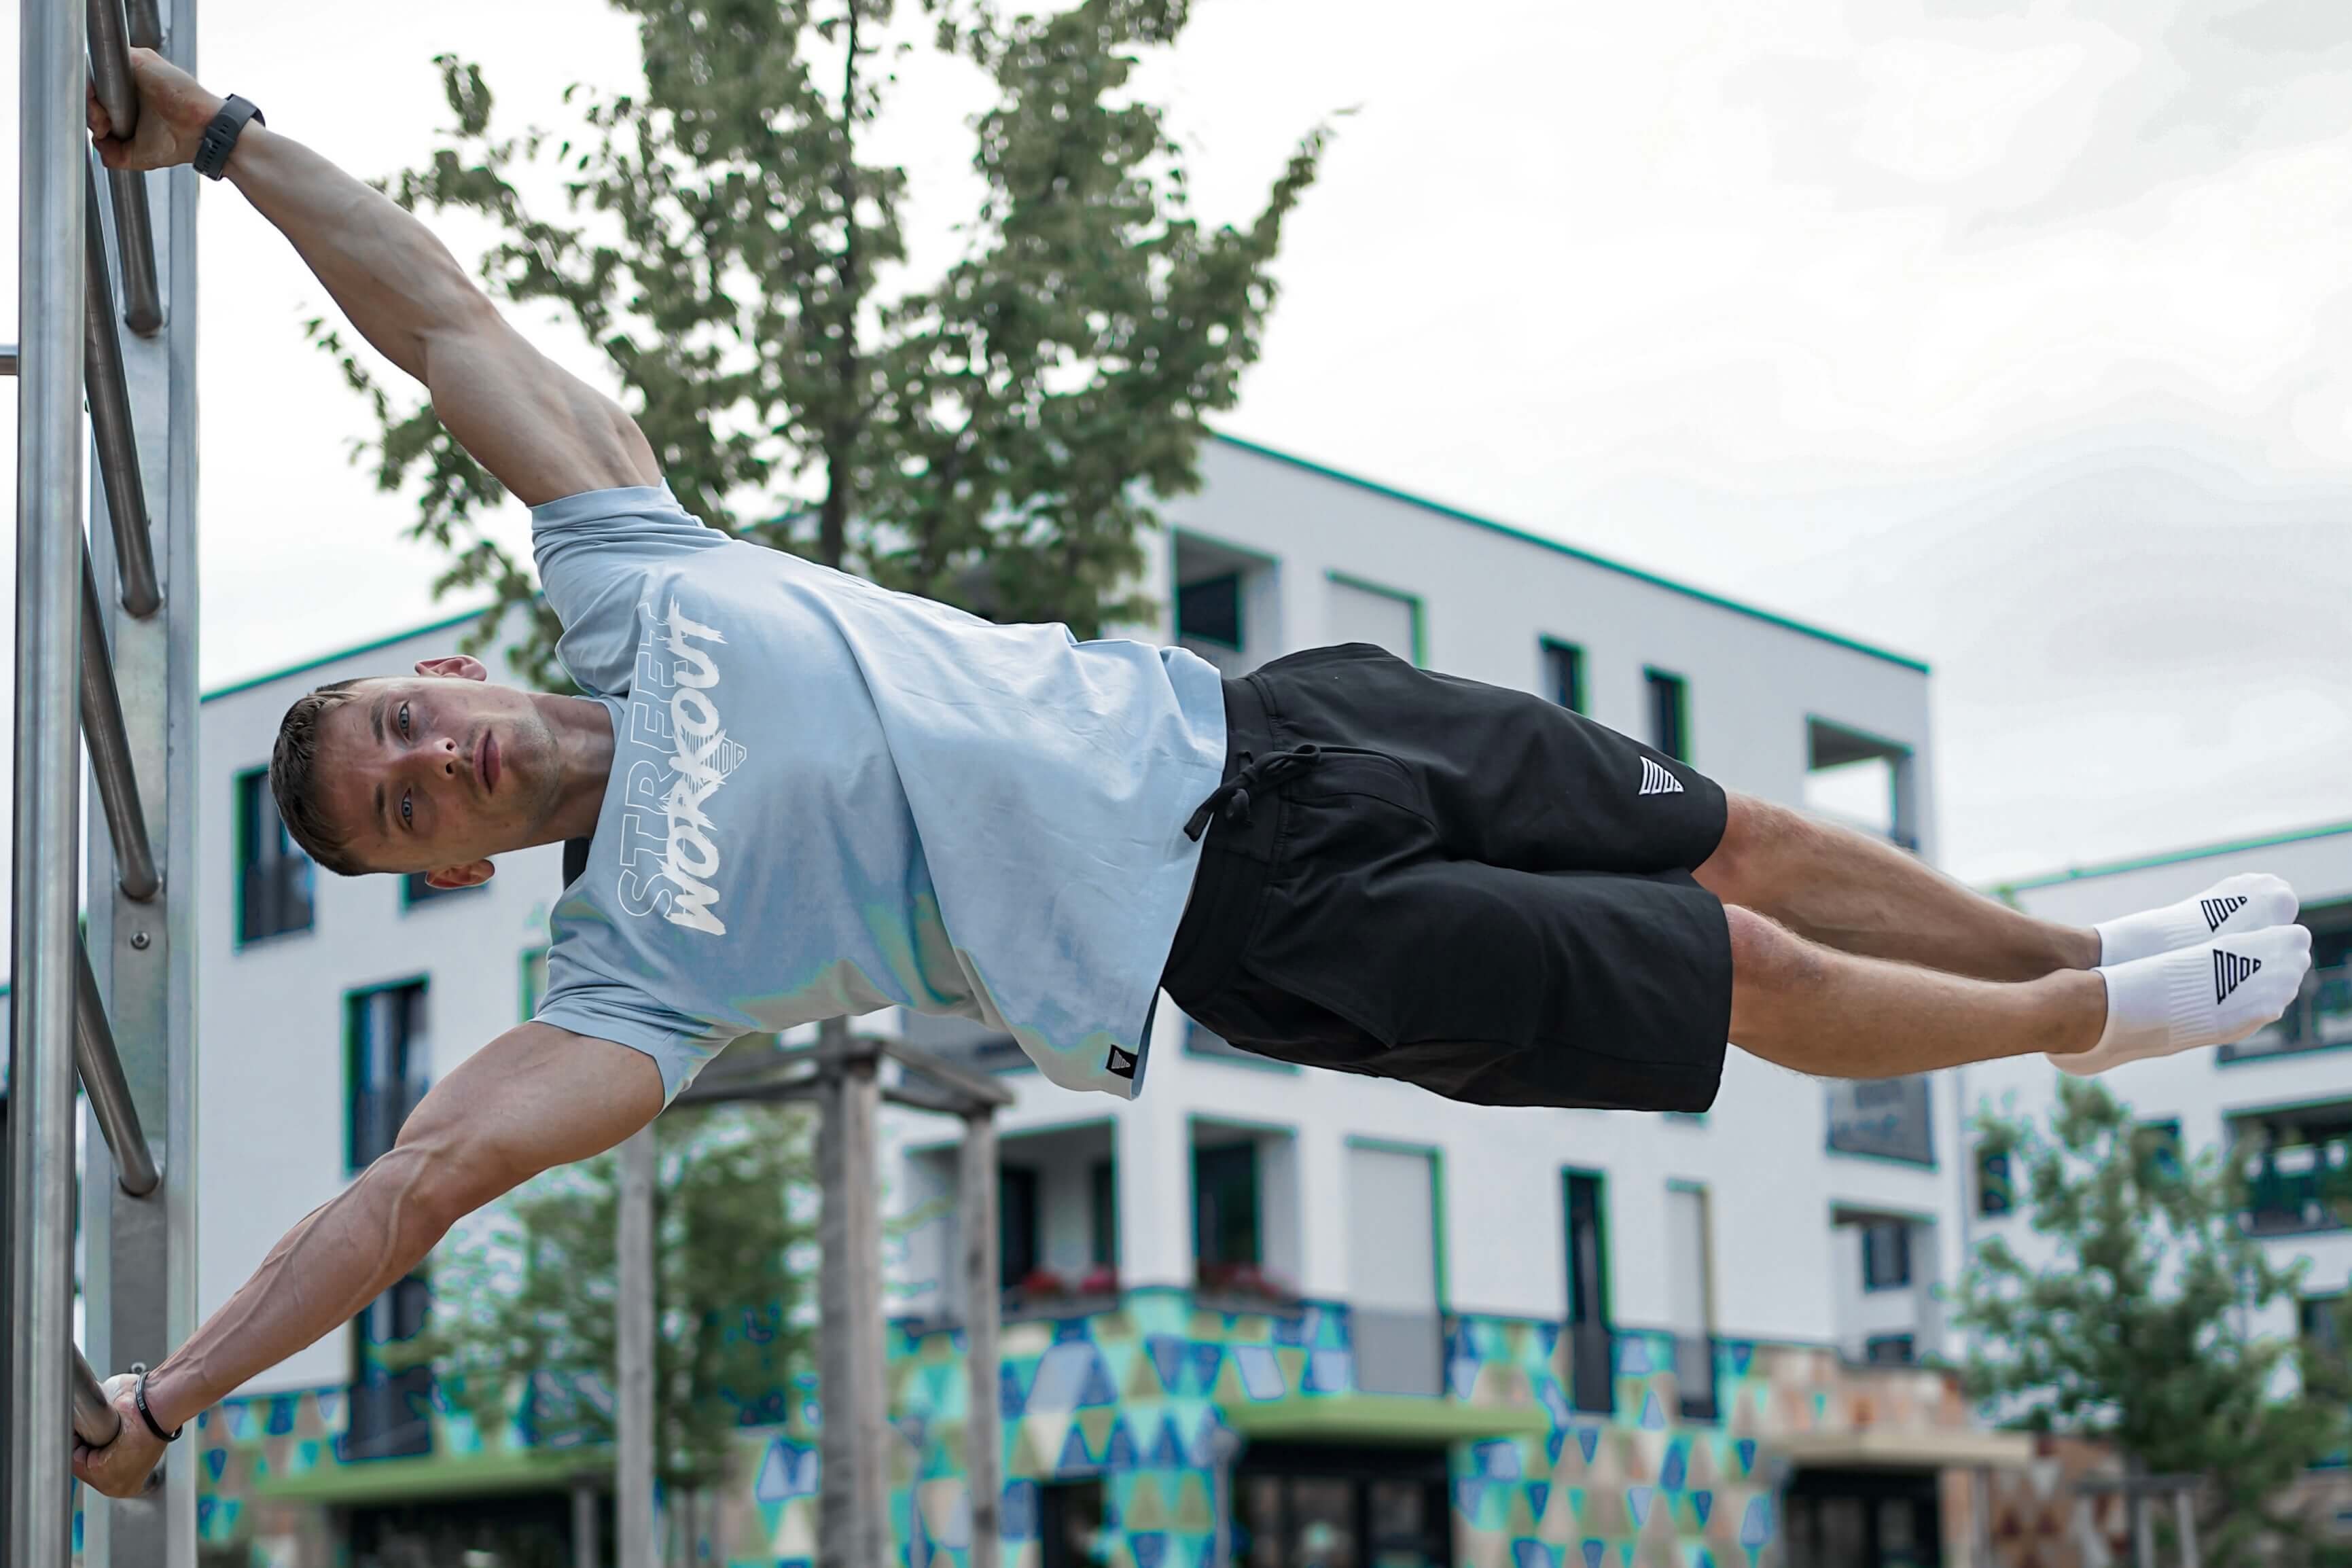 Calisthenics Athlete performing a Human Flag while wearing a Street Workout Shirt and Shorts by GORNATION